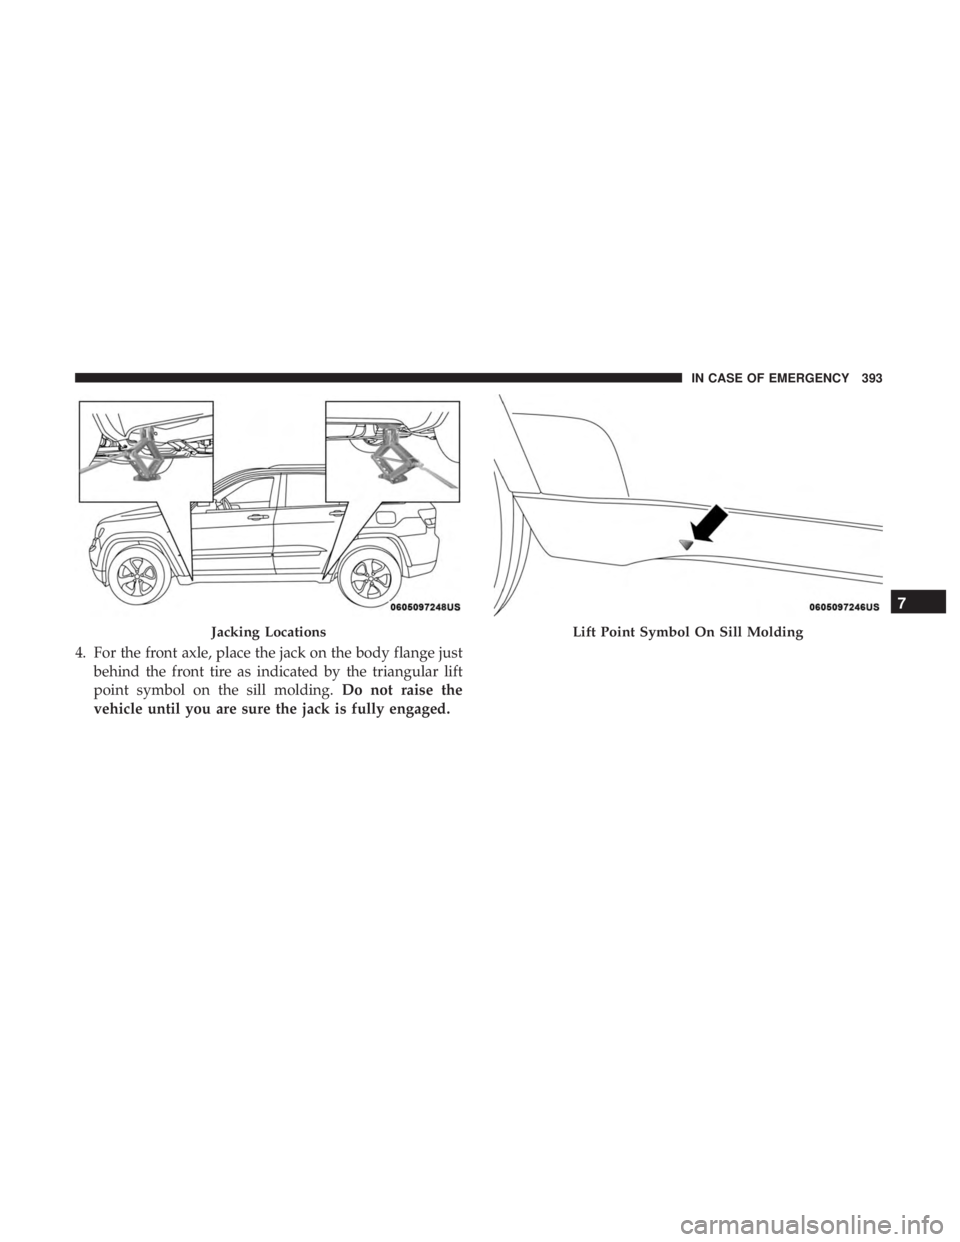 JEEP GRAND CHEROKEE SRT 2017  Owners Manual 4. For the front axle, place the jack on the body flange justbehind the front tire as indicated by the triangular lift
point symbol on the sill molding. Do not raise the
vehicle until you are sure the